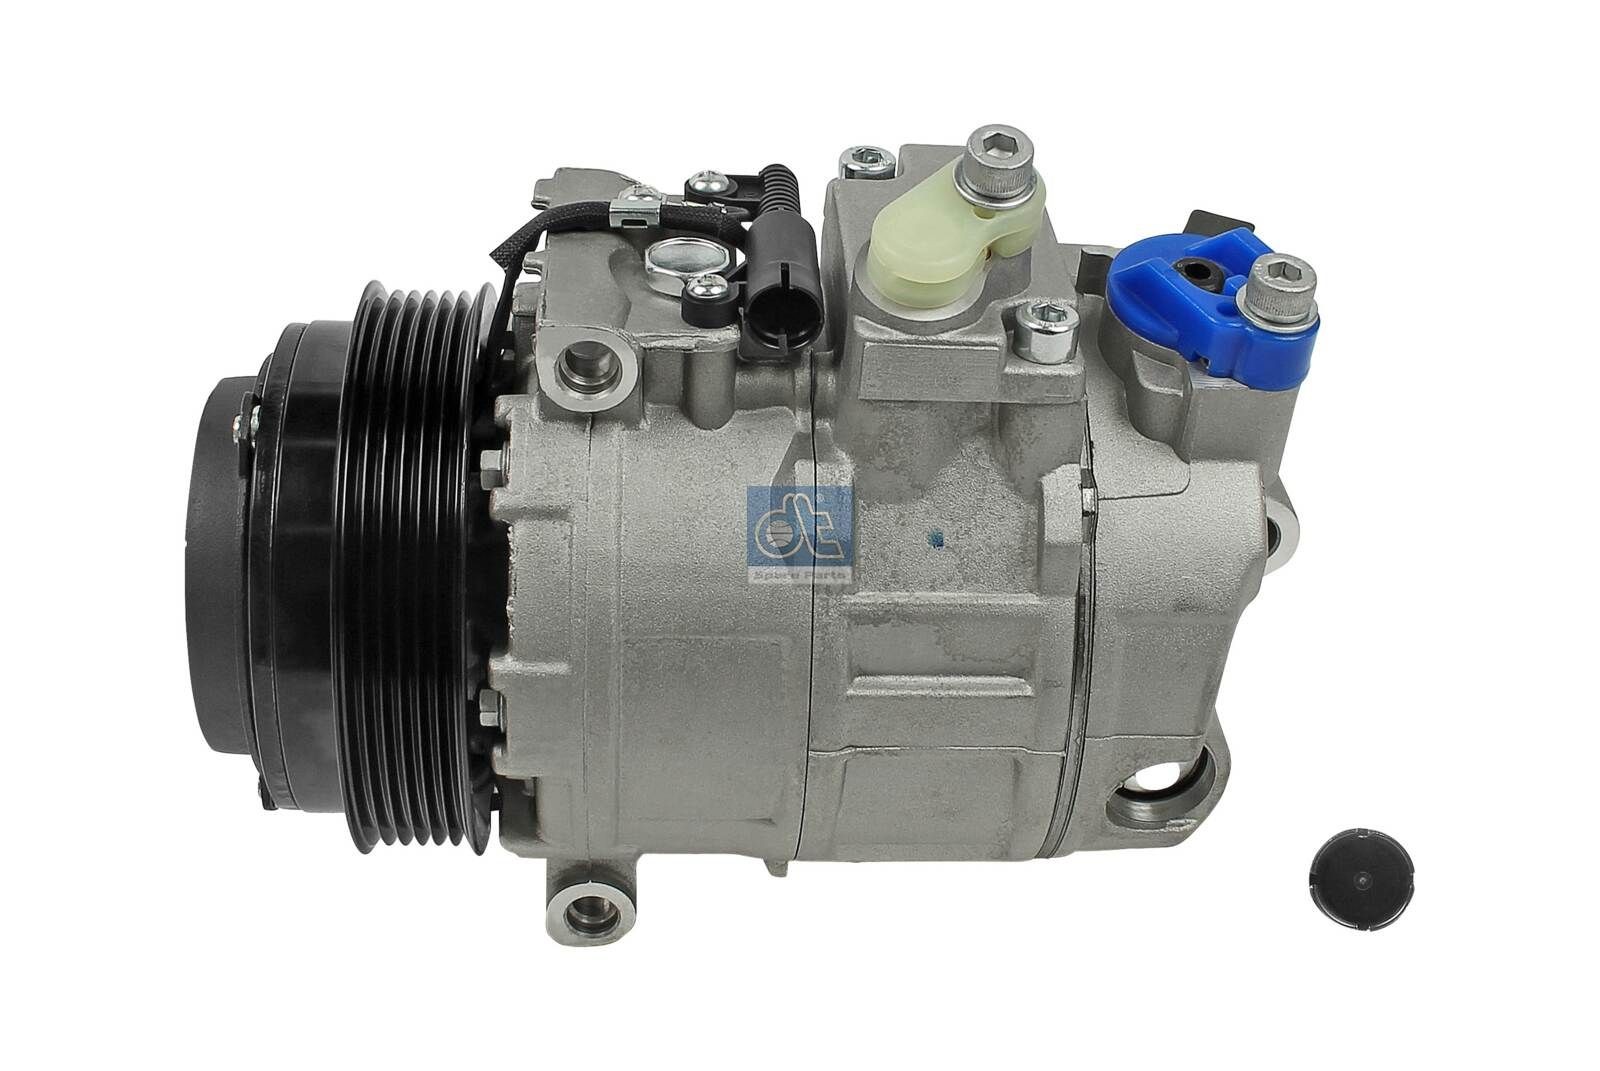 8FK 351 175-511 DT Spare Parts 4.66350 Air conditioning compressor 000 234 70 11